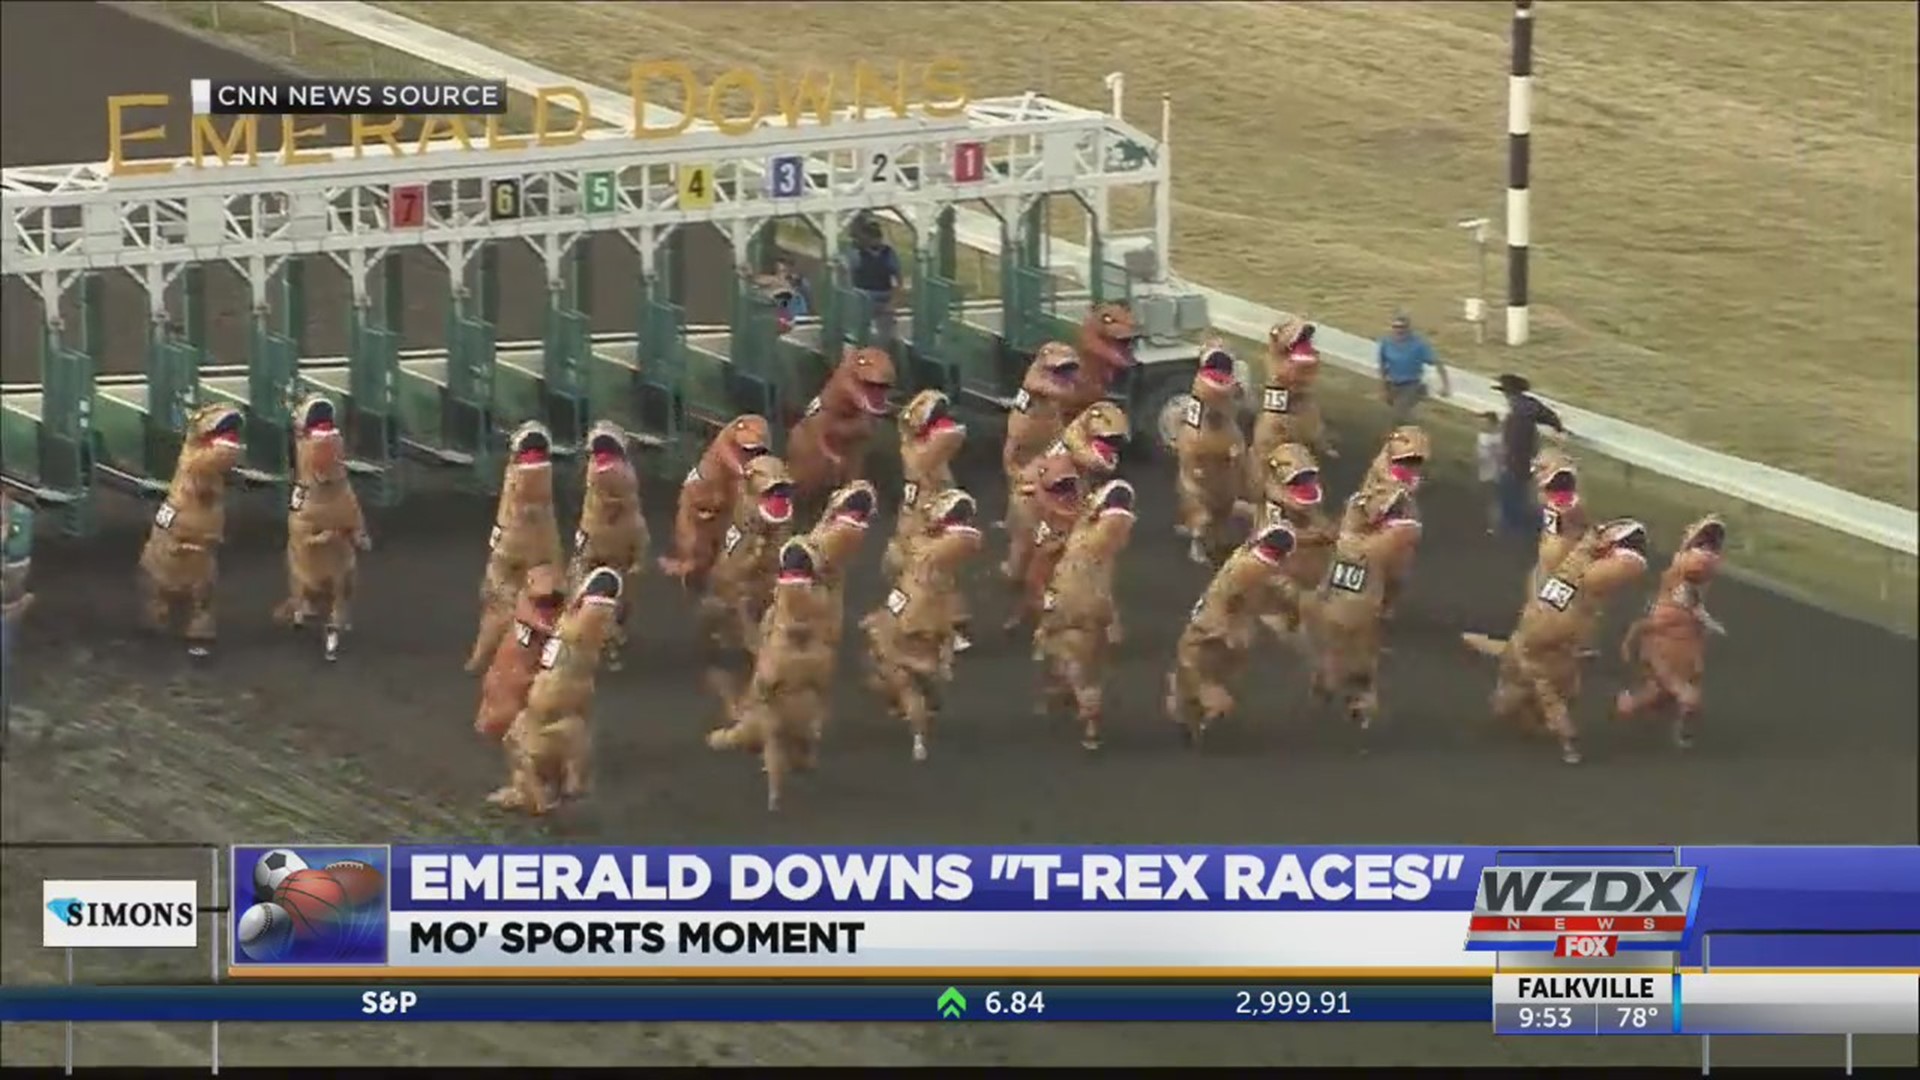 At first glance, the starting gate at Emerald Downs racetrack looks relatively normal. But then the gates open and the race begins, and instead of thoroughbreds a mass of people bursts forth, running as fast as they can — while wearing oversized T-Rex costumes.